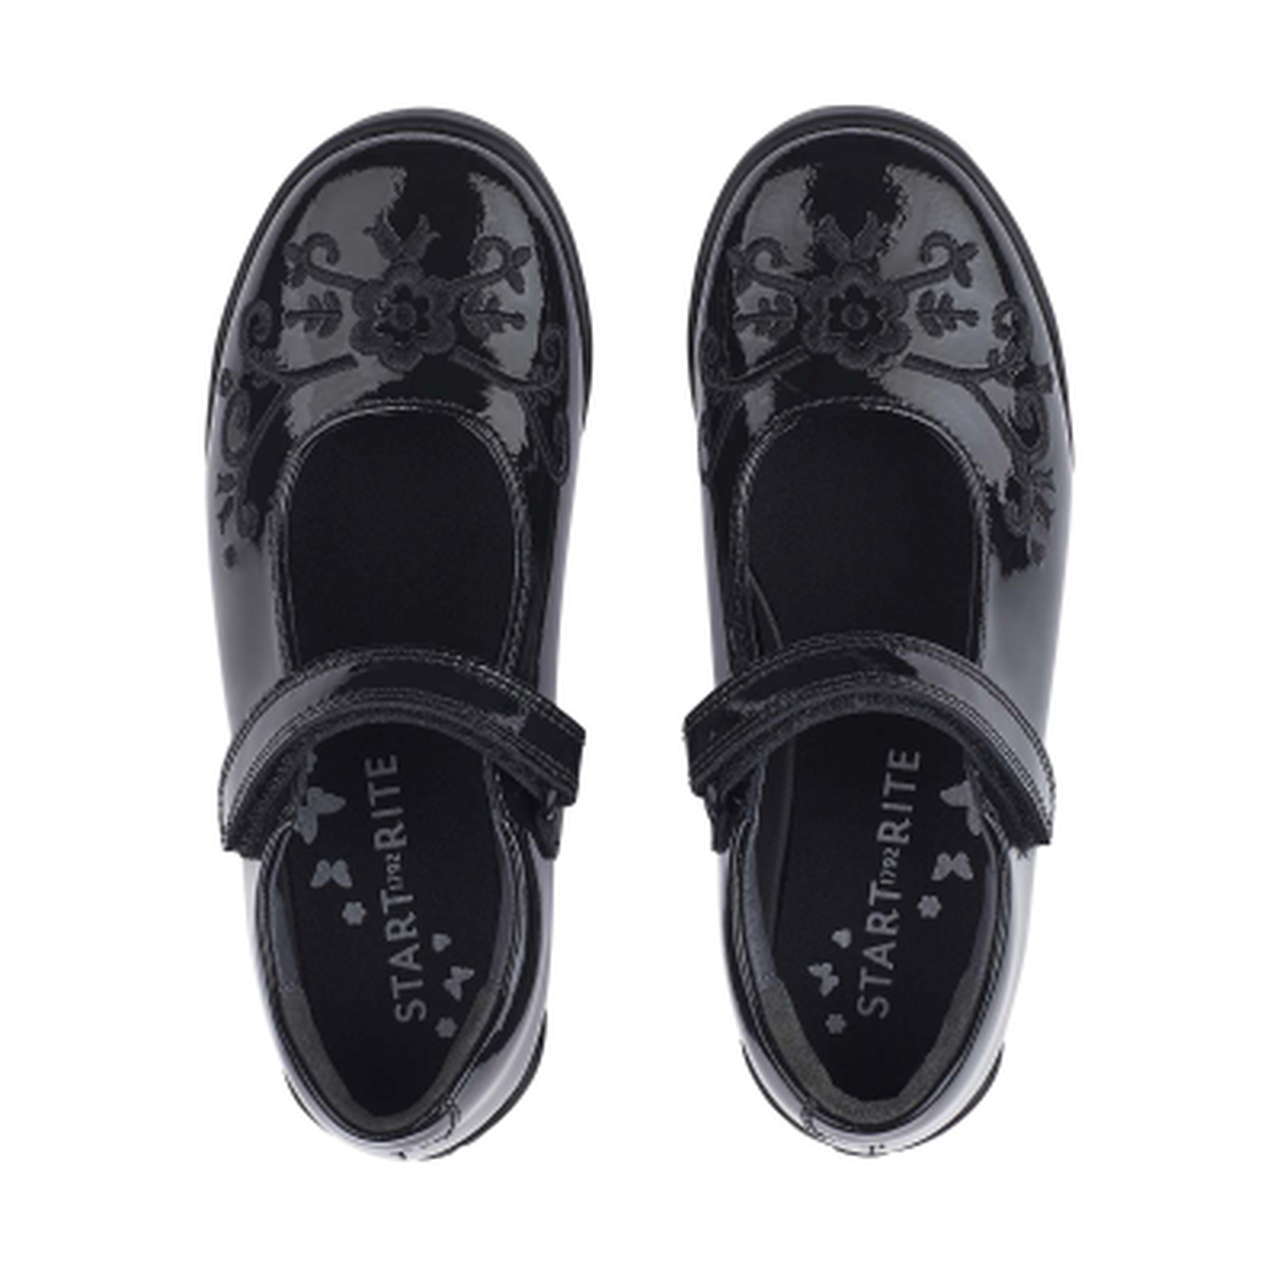 Start-Rite Hopscotch 2788-3 Black Patent Girls Leather Mary Jane Shoe - elevate your sole